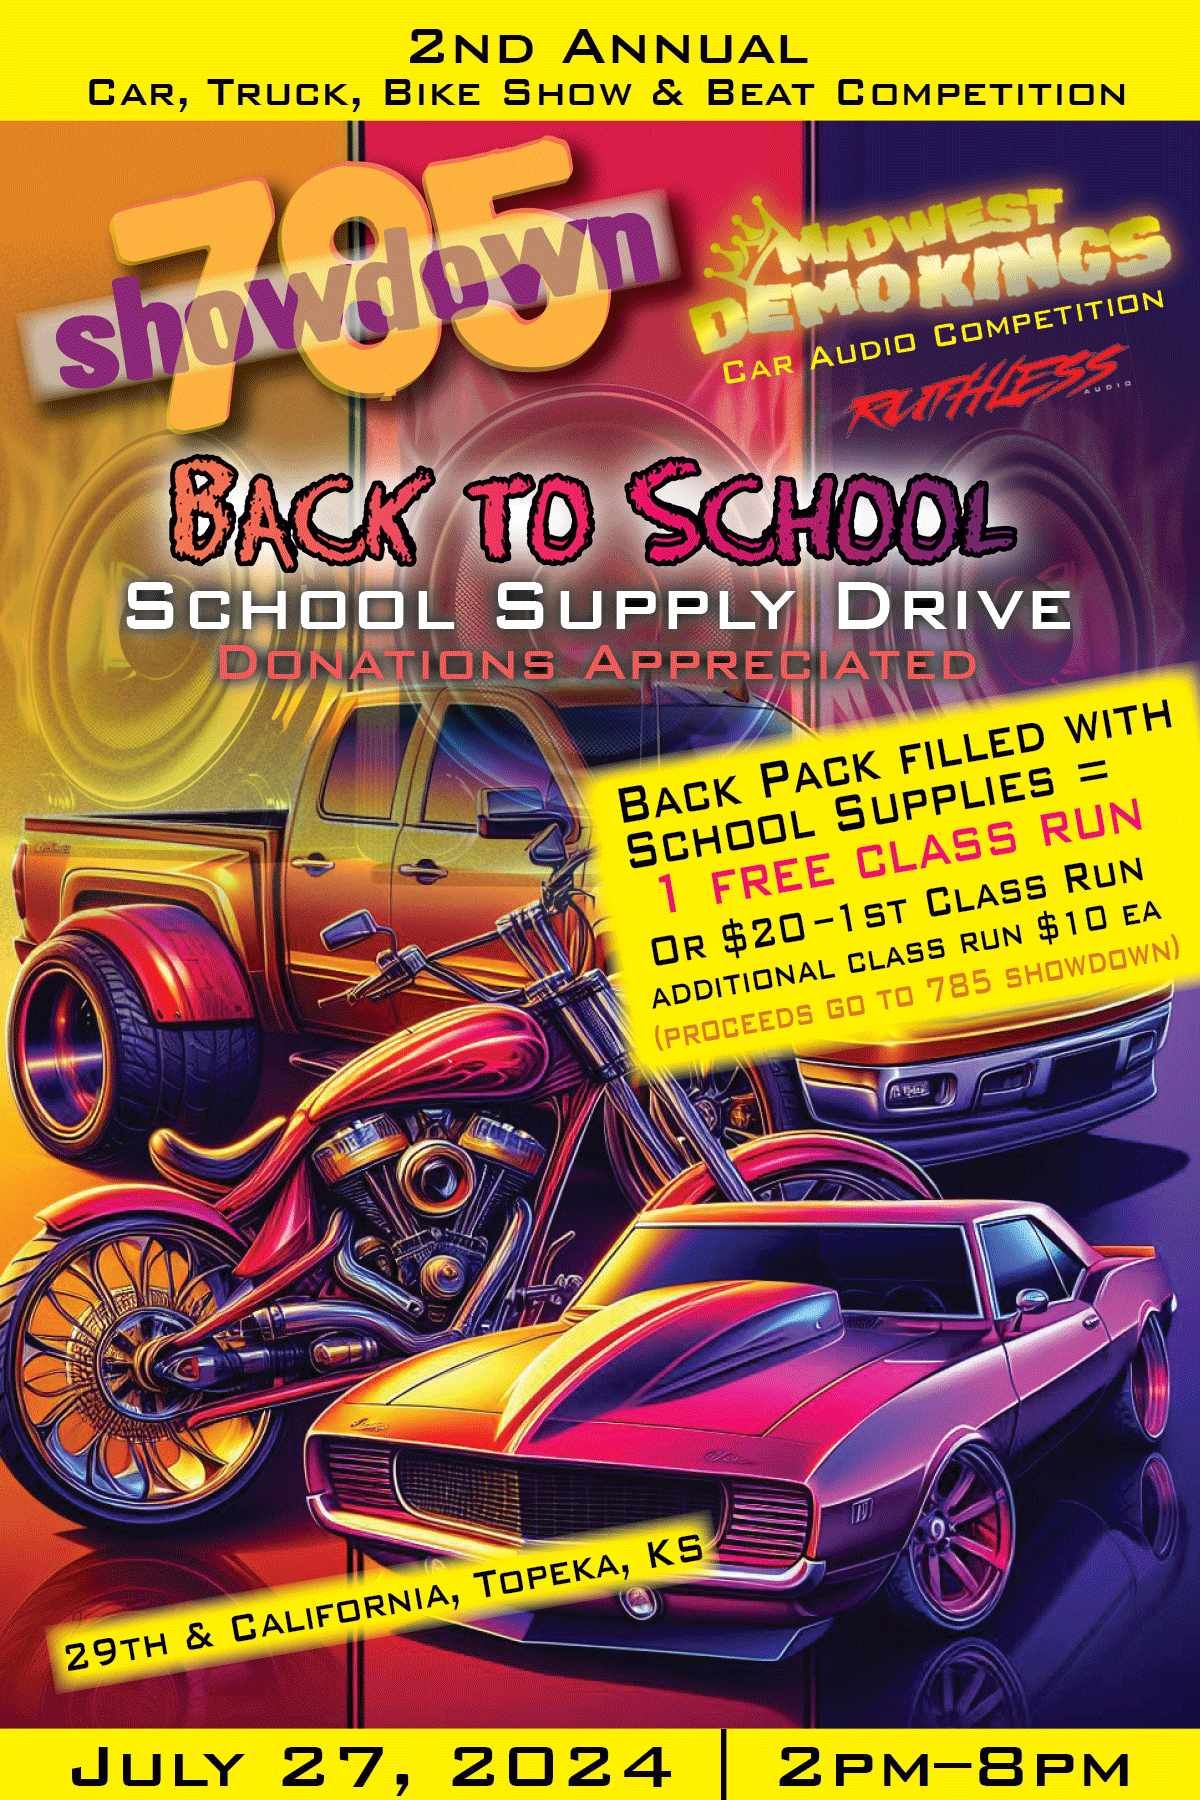 785 Showdown Back to School Drive with Midwest Demo Kings Car Audio Show